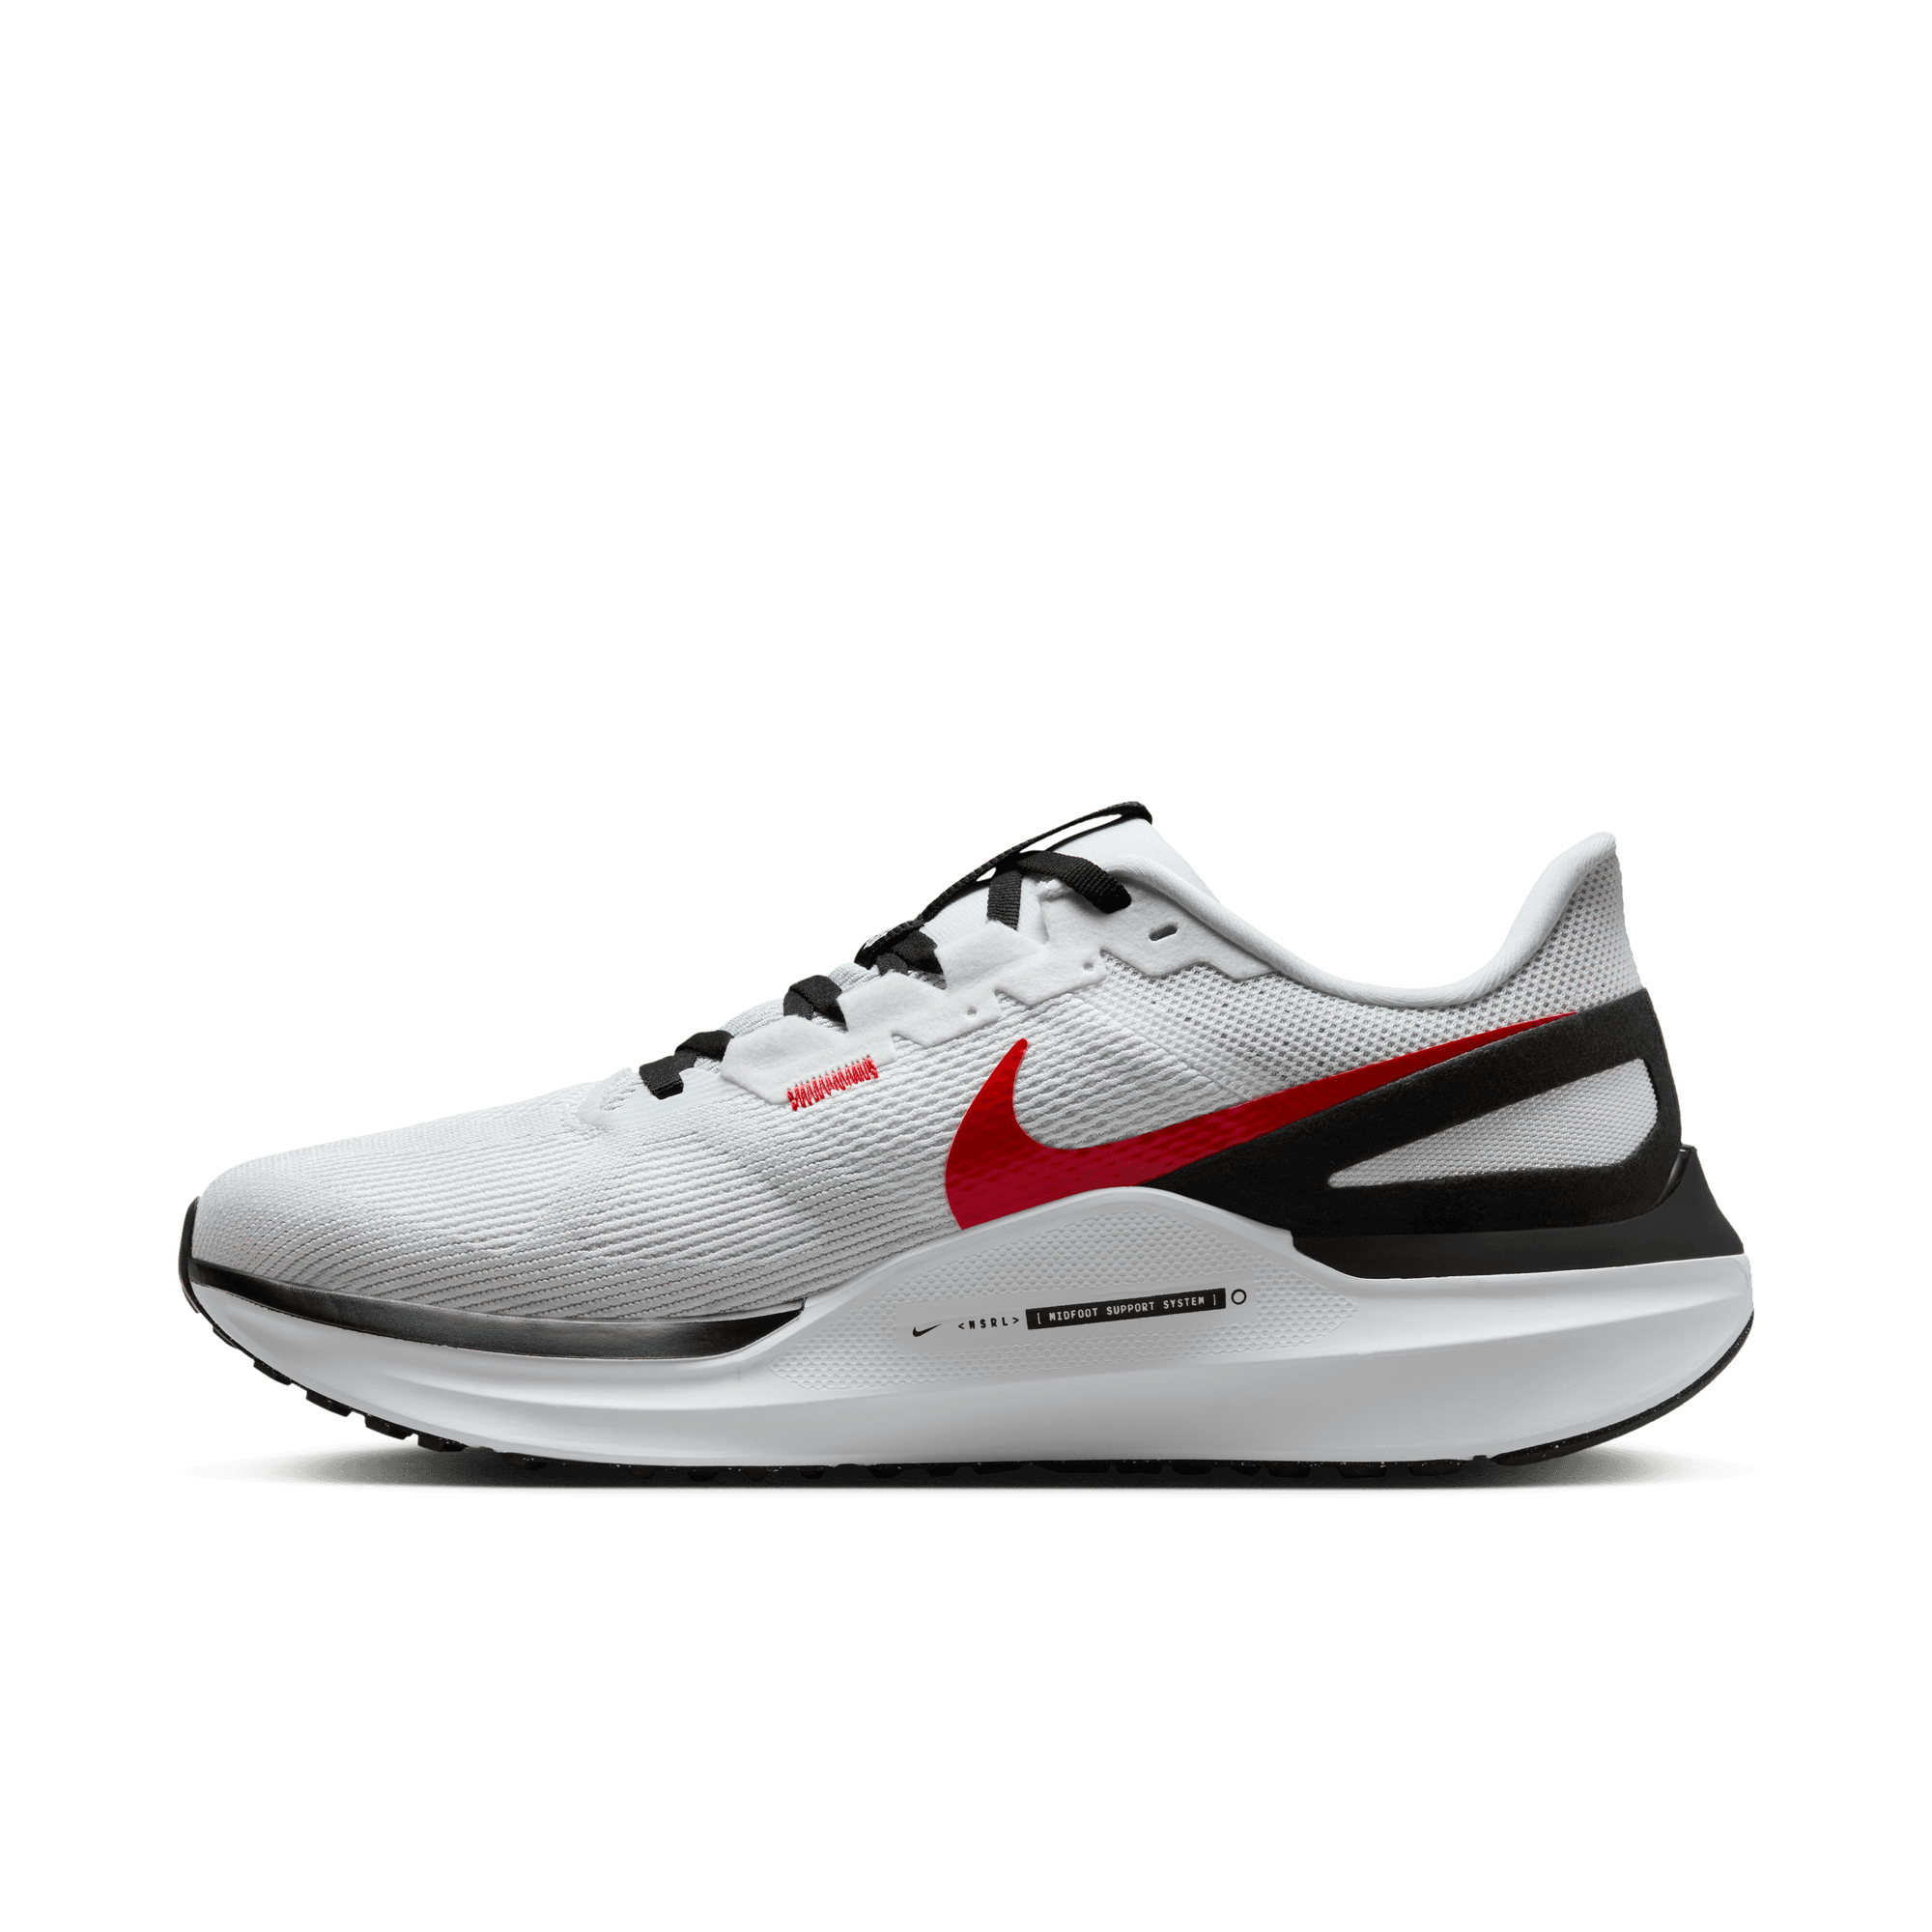 NIKE STRUCTURE 25 MEN'S ROAD RUNNING SHOES